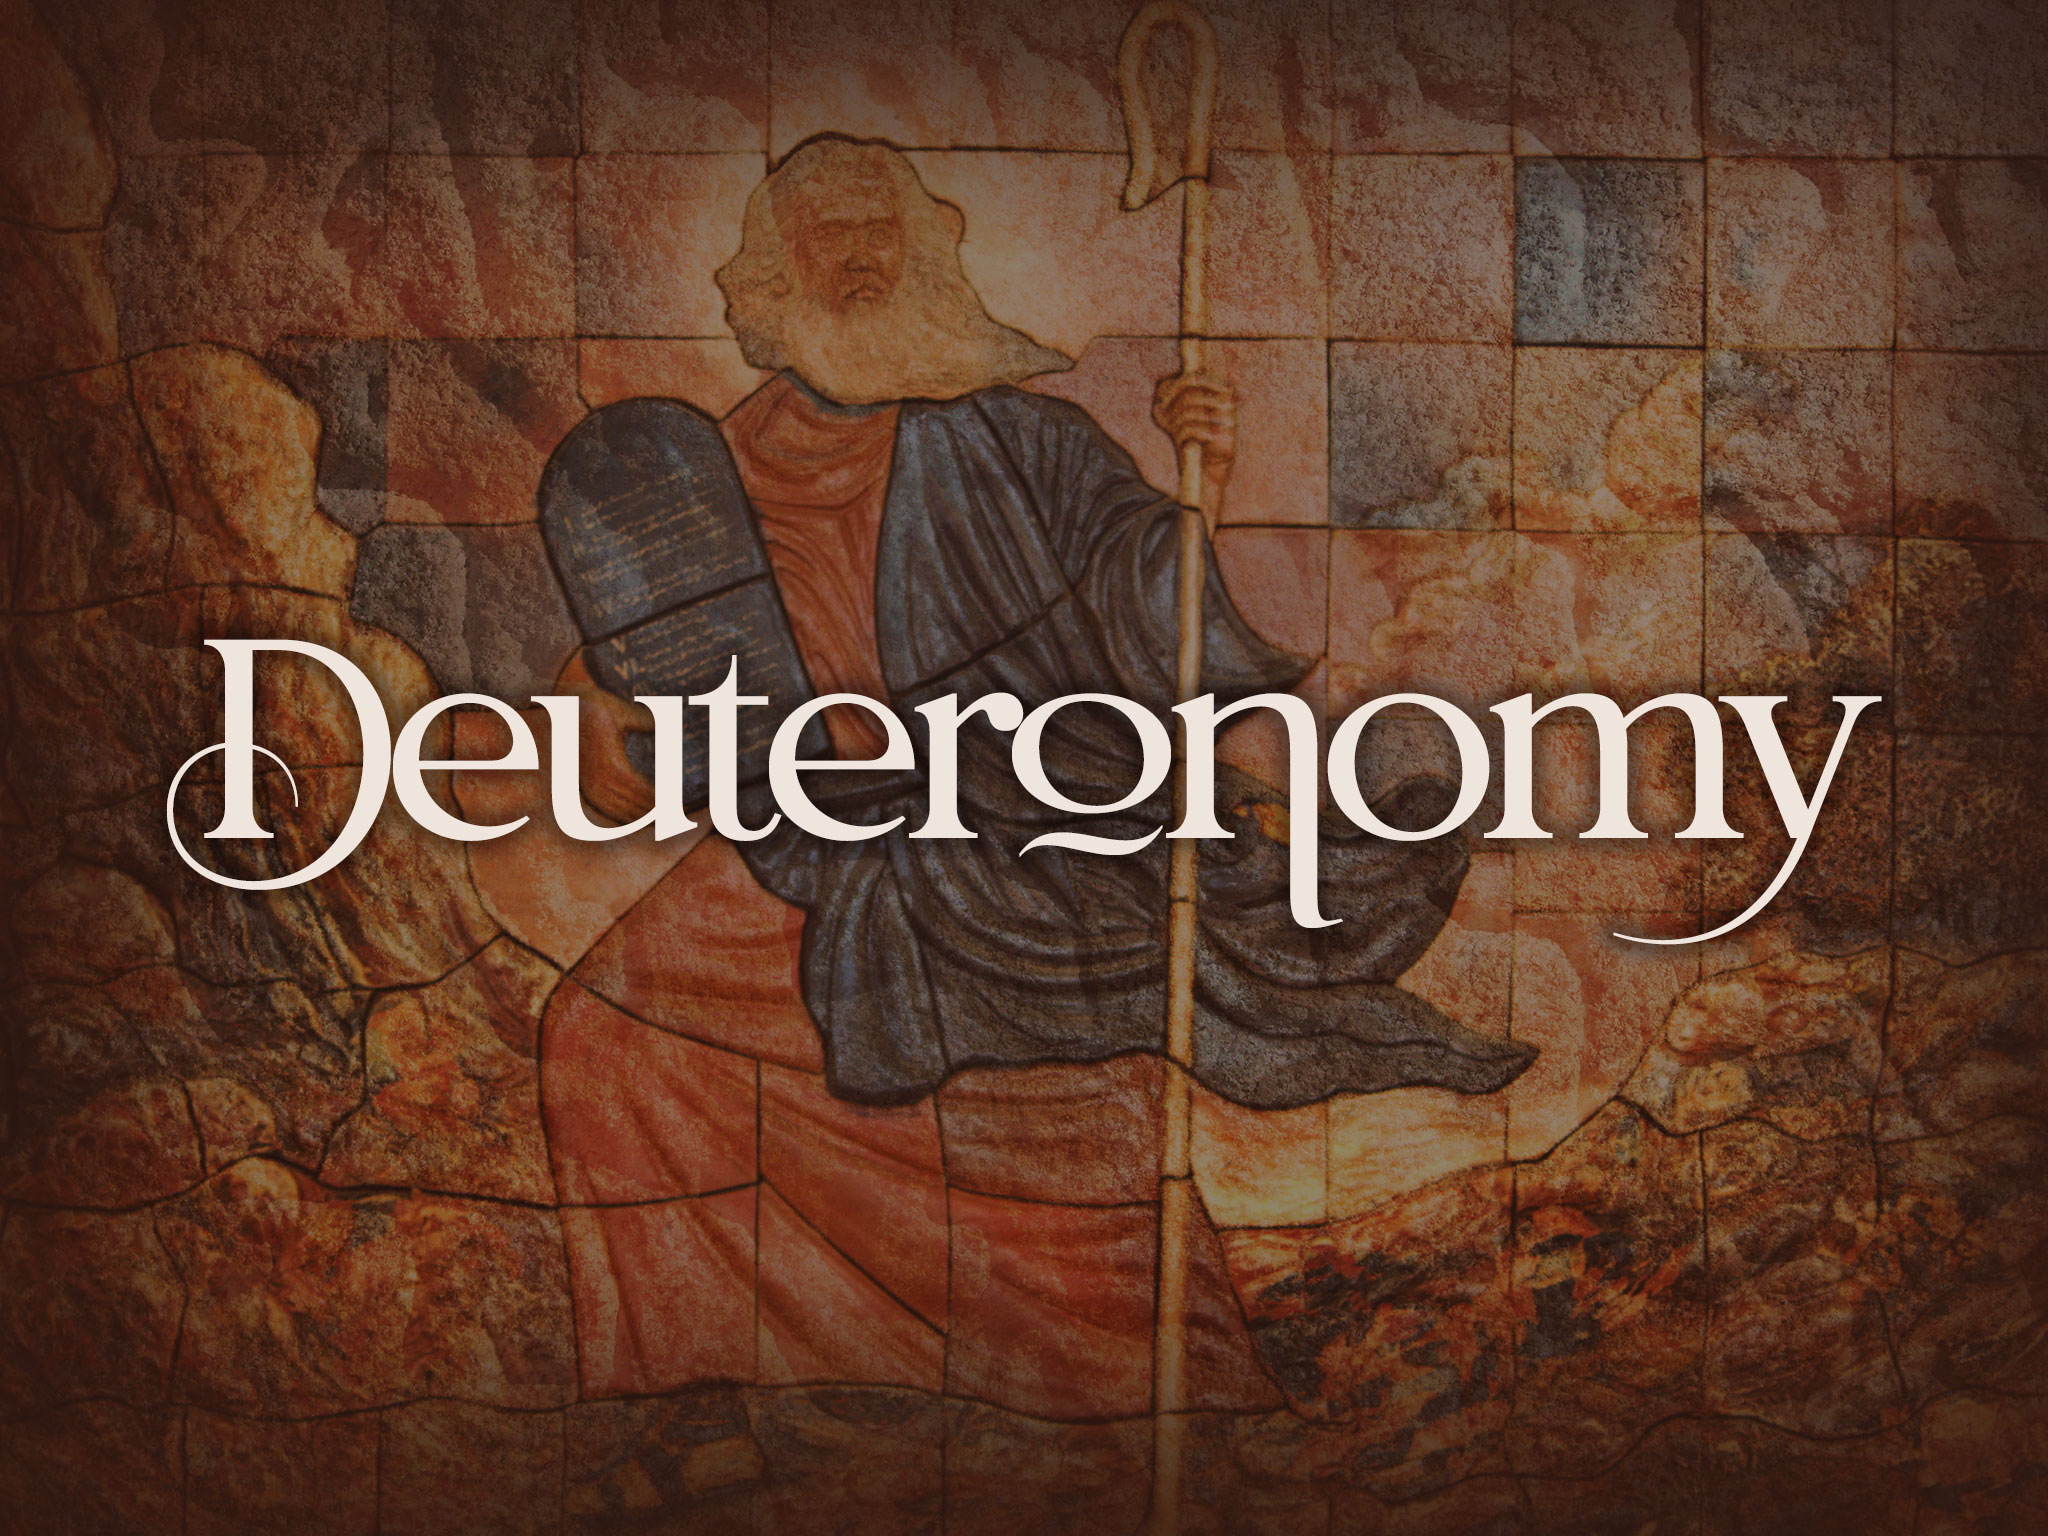 The Prophecy of the Latter Days (Deuteronomy 4:25-31)